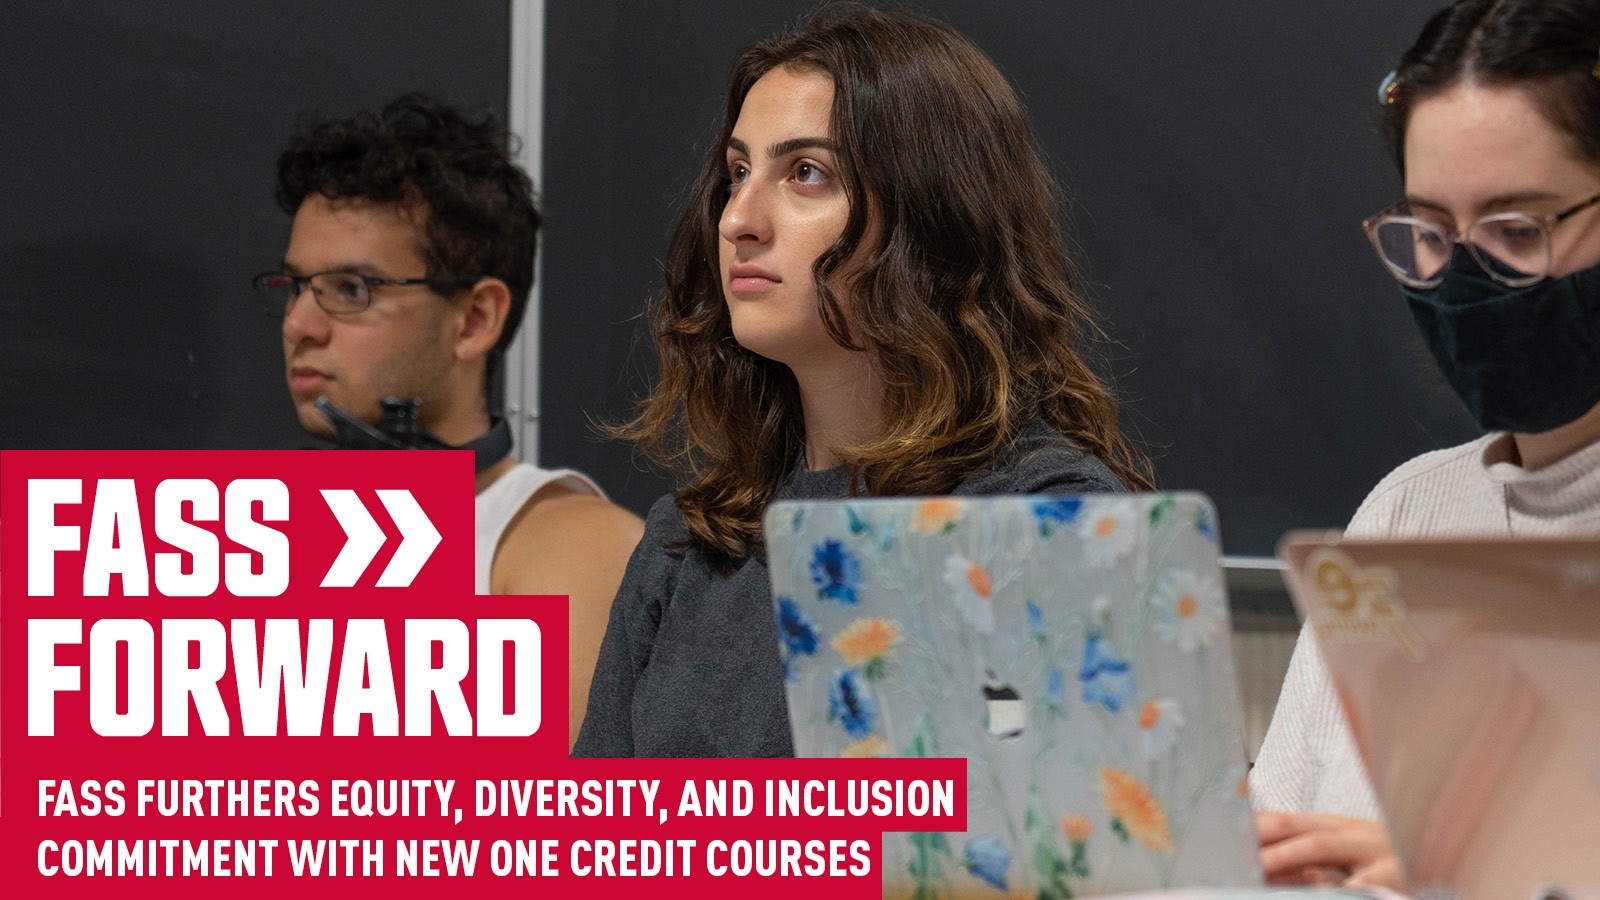 Three students sit in a classroom as they watch a presentation. Their laptops are open in front of them. The student is the middle who is the focus of the image is female presenting with dark brown wavy hair and a grey shirt. In the bottom left corner is white text on a red background that reads: FASS >> FORWARD FASS FURTHERS EQUITY, DIVERSITY, AND INCLUSION COMMITMENT WITH NEW ONE CREDIT COURSES